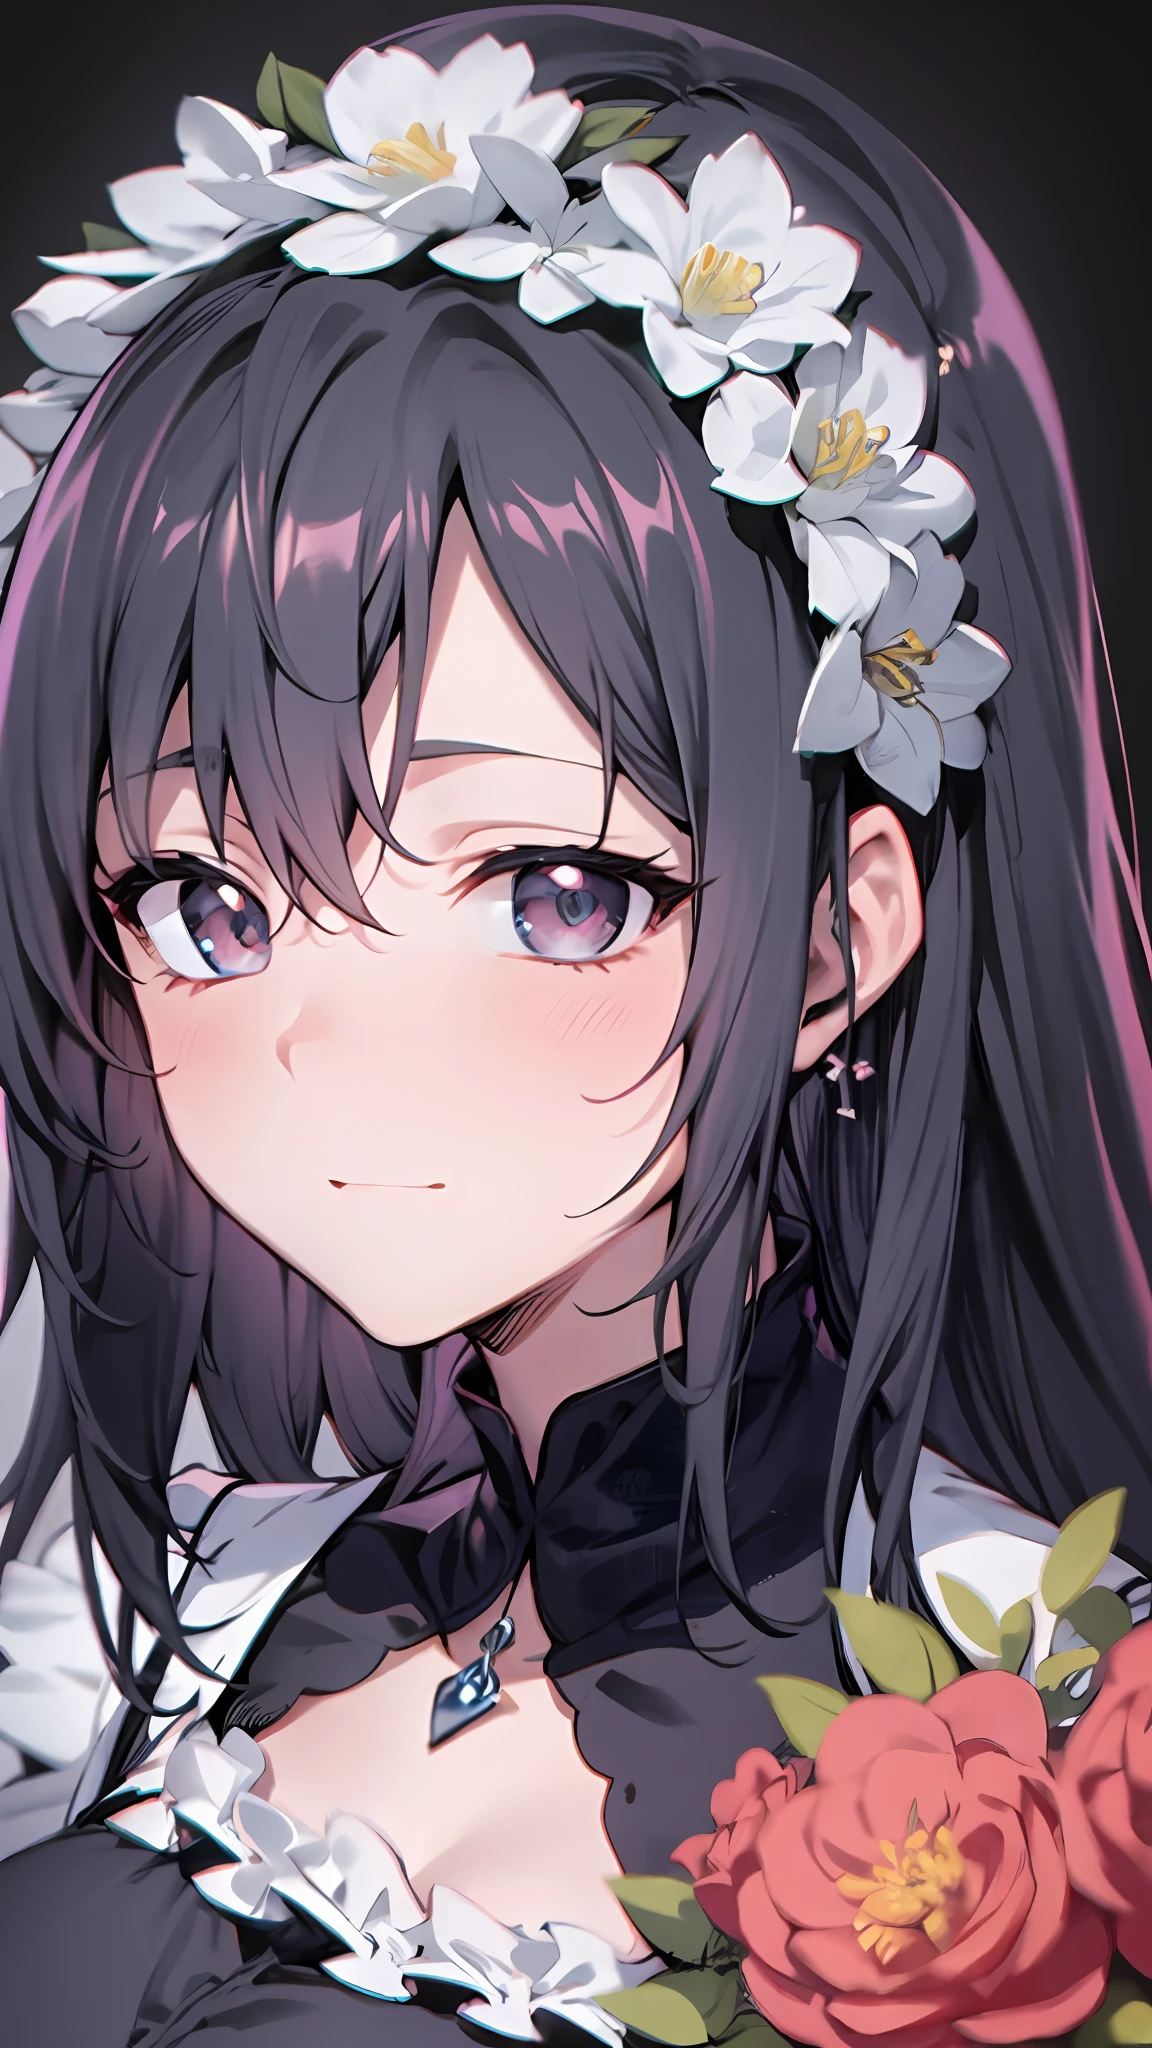 Close up portrait of woman in dress in white and black dress、Gothic Otome anime girl、anime girl wearing a black dress、Cute anime waifu in a nice dress、Anime girl in maid costume、Elegant Gothic princess、guweiz、Gwaits at Pixiv Art Station、Gwaitz at Art Station pixiv、Beautiful anime girl、